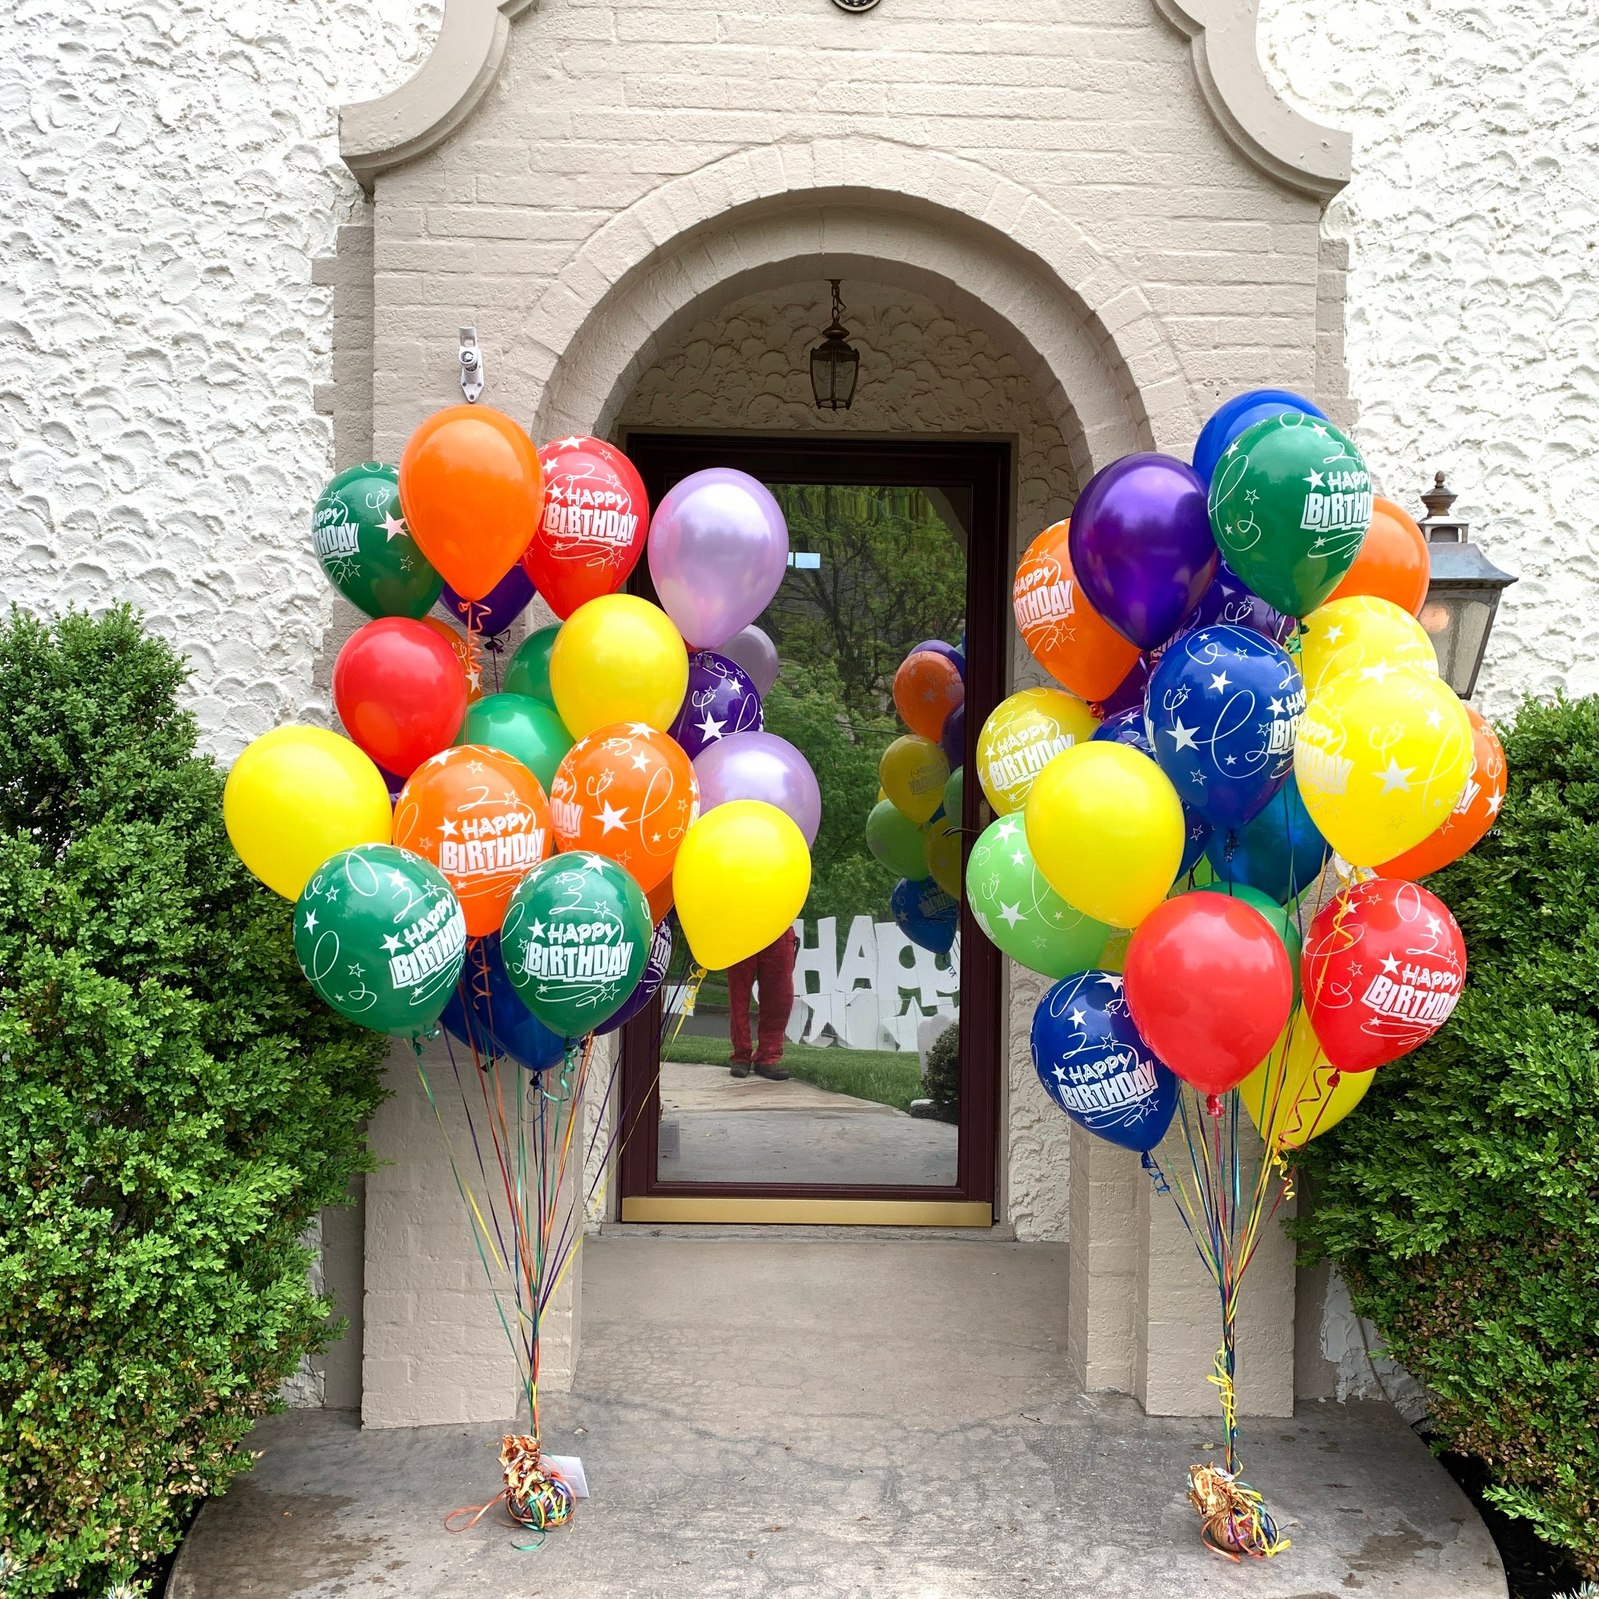 In front of an entryway to a white brick home are two large helium balloon bouquets of red yellow orange blue green and purple with happy birthday text on them